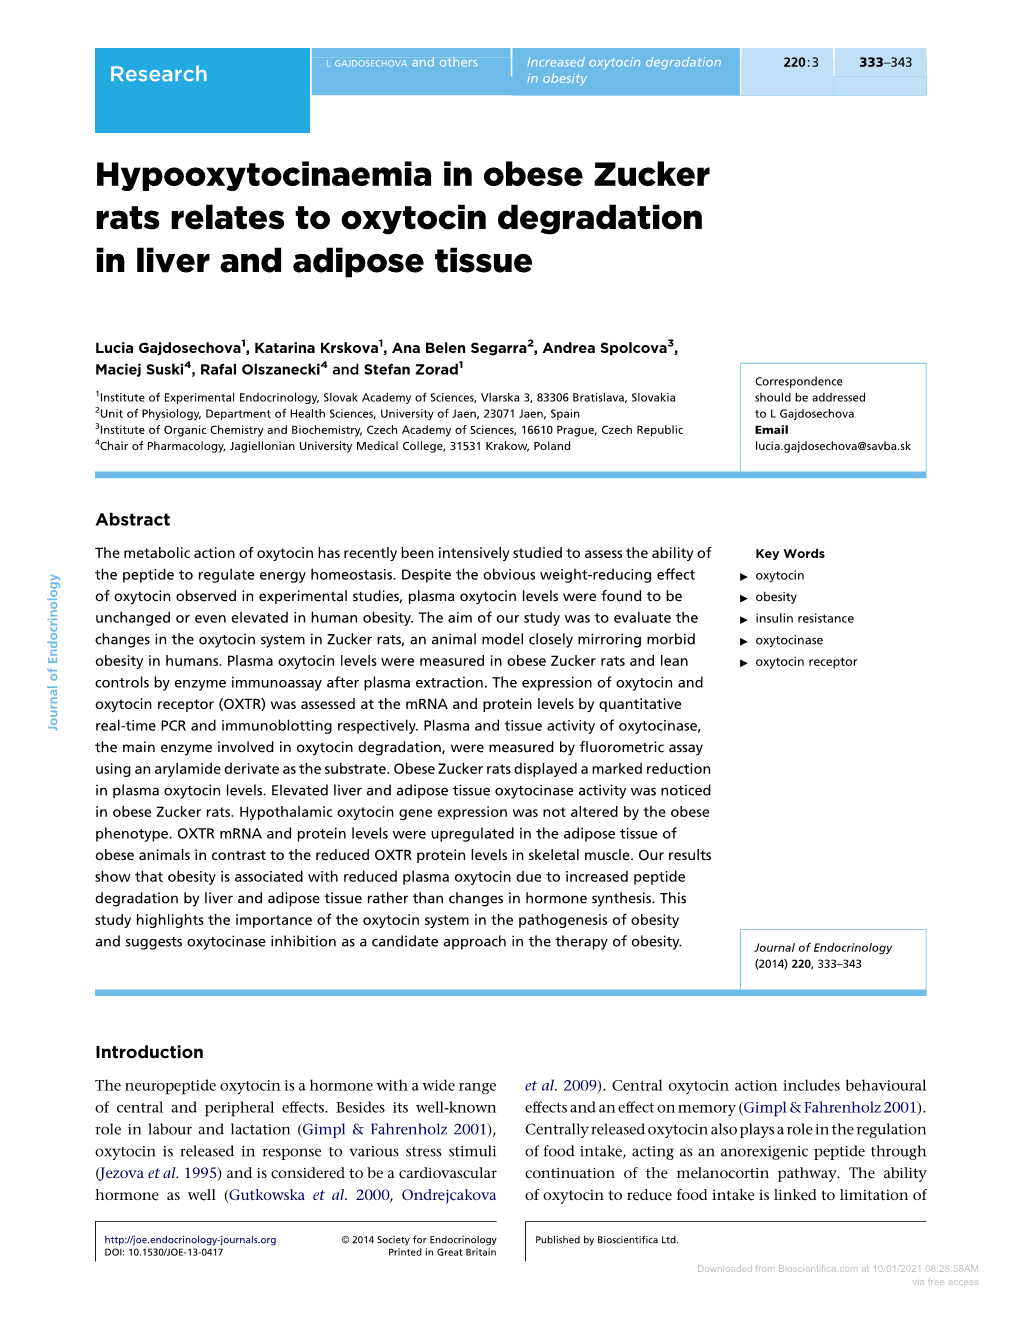 Hypooxytocinaemia in Obese Zucker Rats Relates to Oxytocin Degradation in Liver and Adipose Tissue